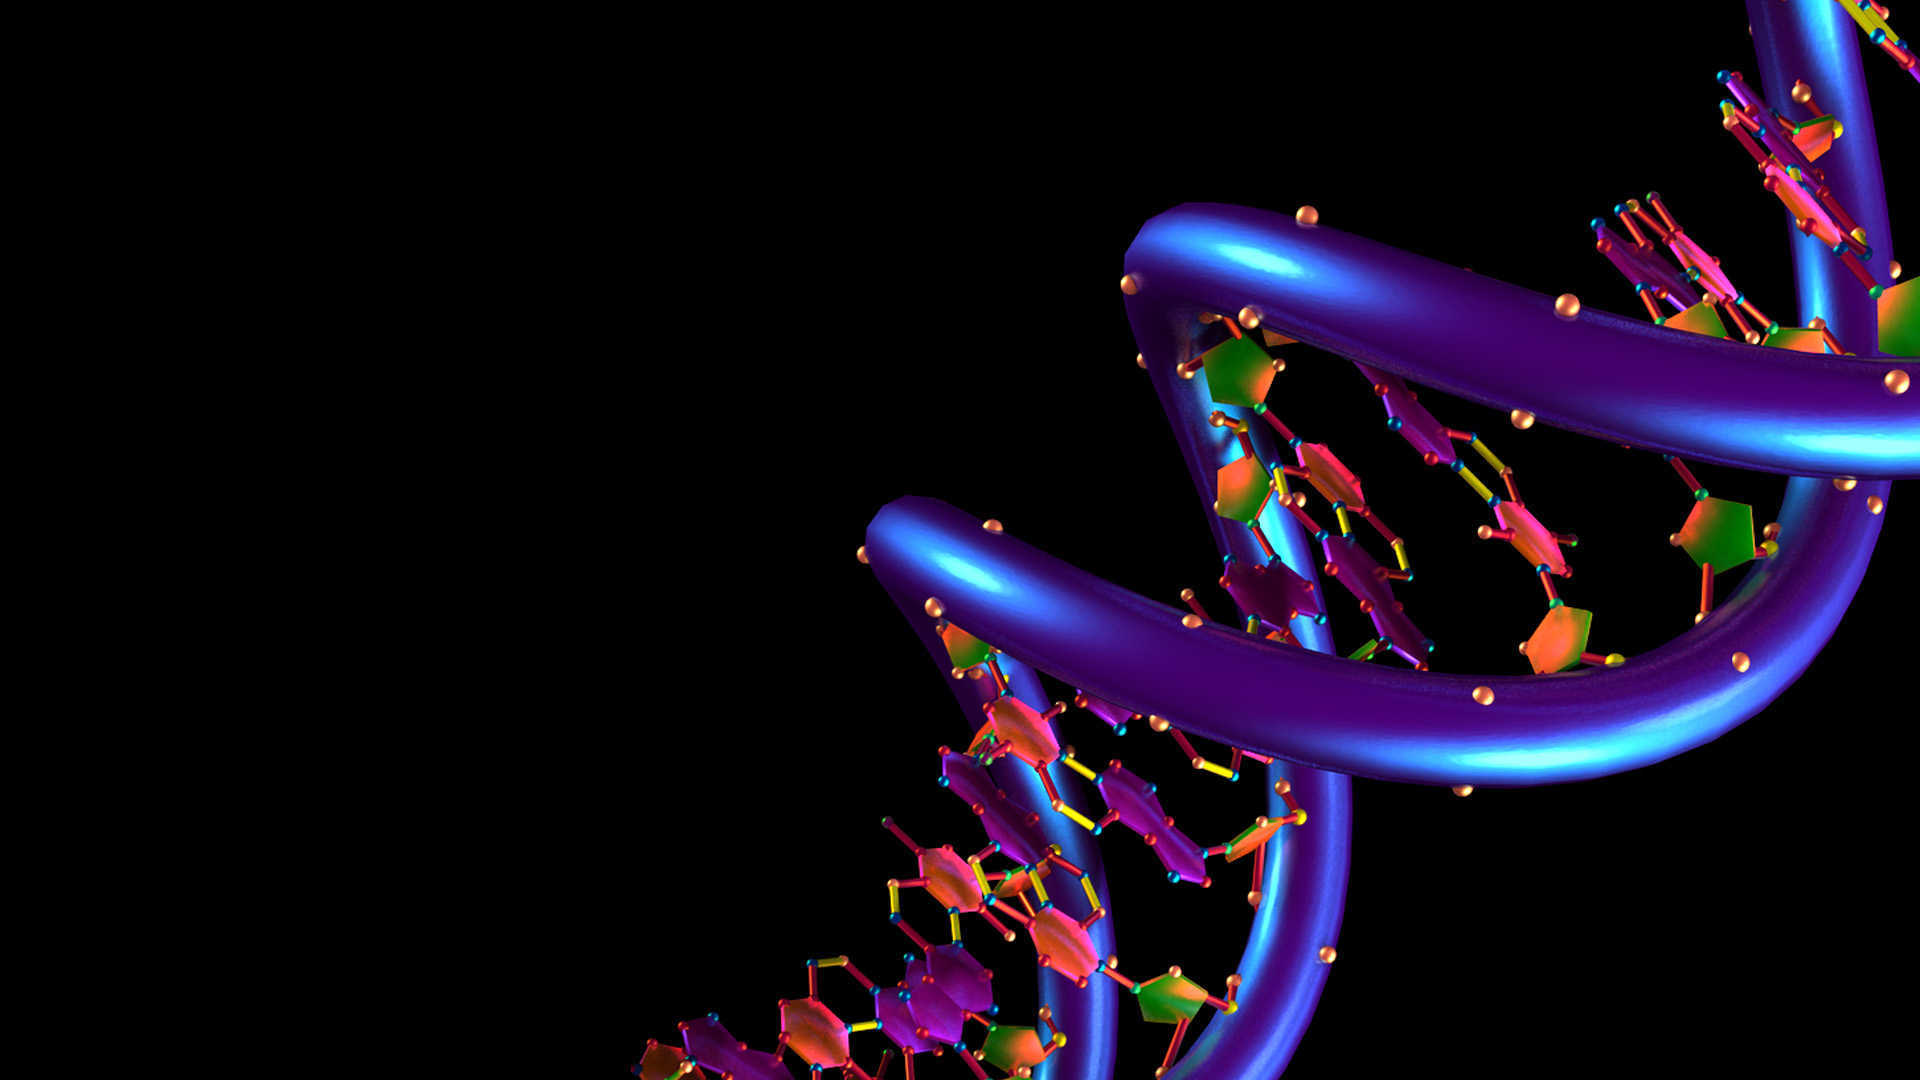 Wallpaper Structure Of Dna Black Wallpaper Upload at August 7 2015 1920x1080